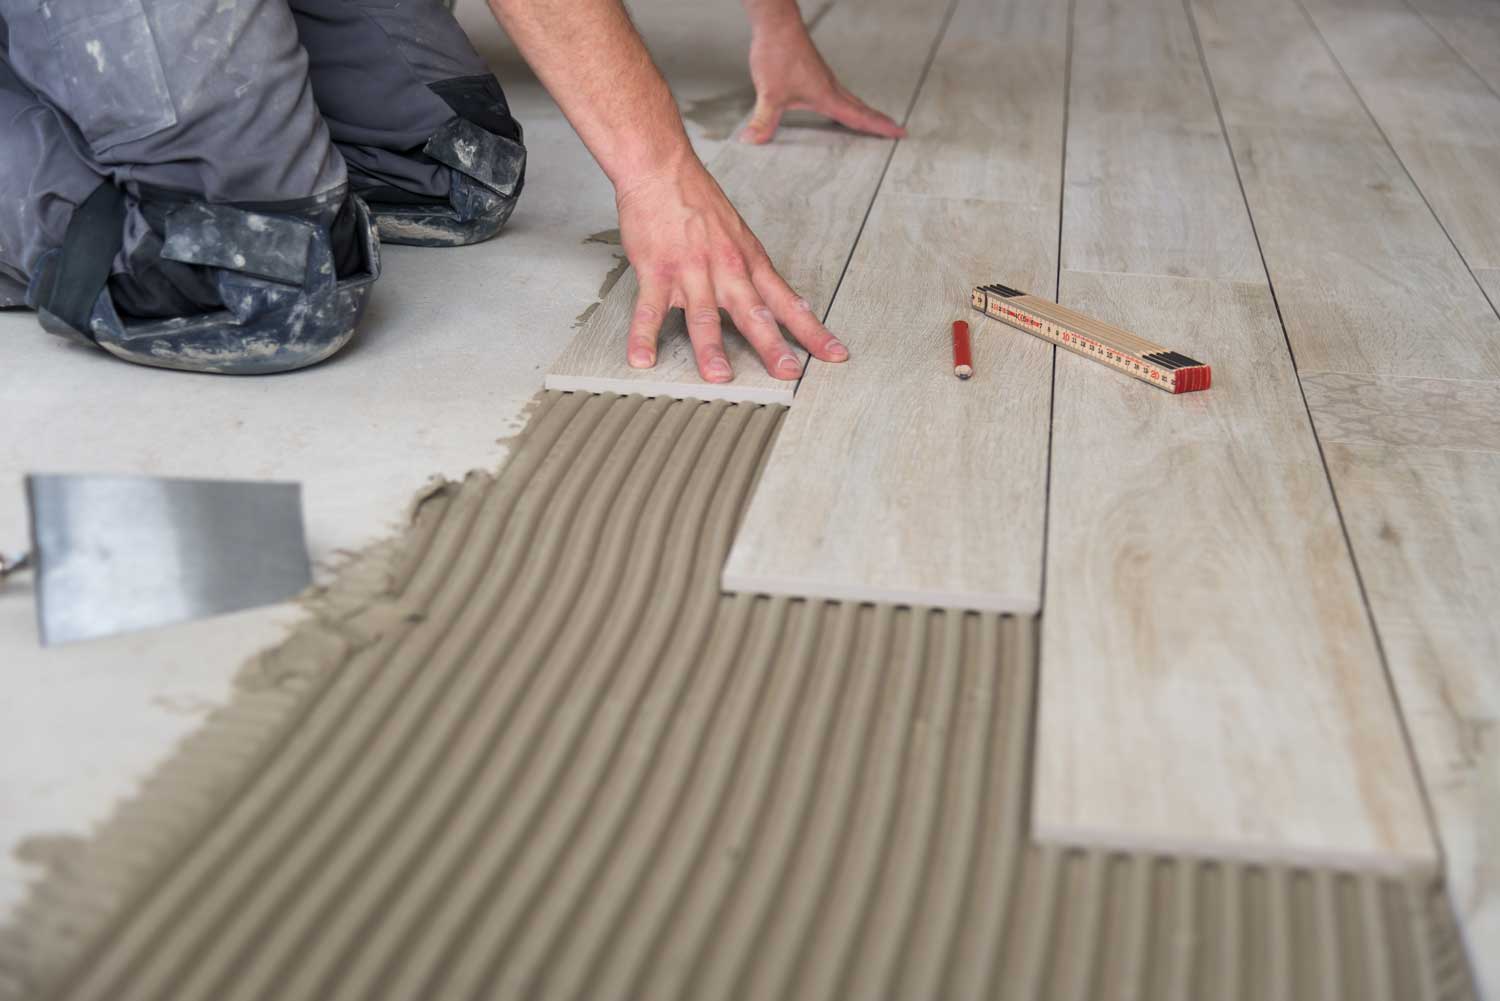 At Footprints Floors, our tile contractors get the job done - just read the reviews!